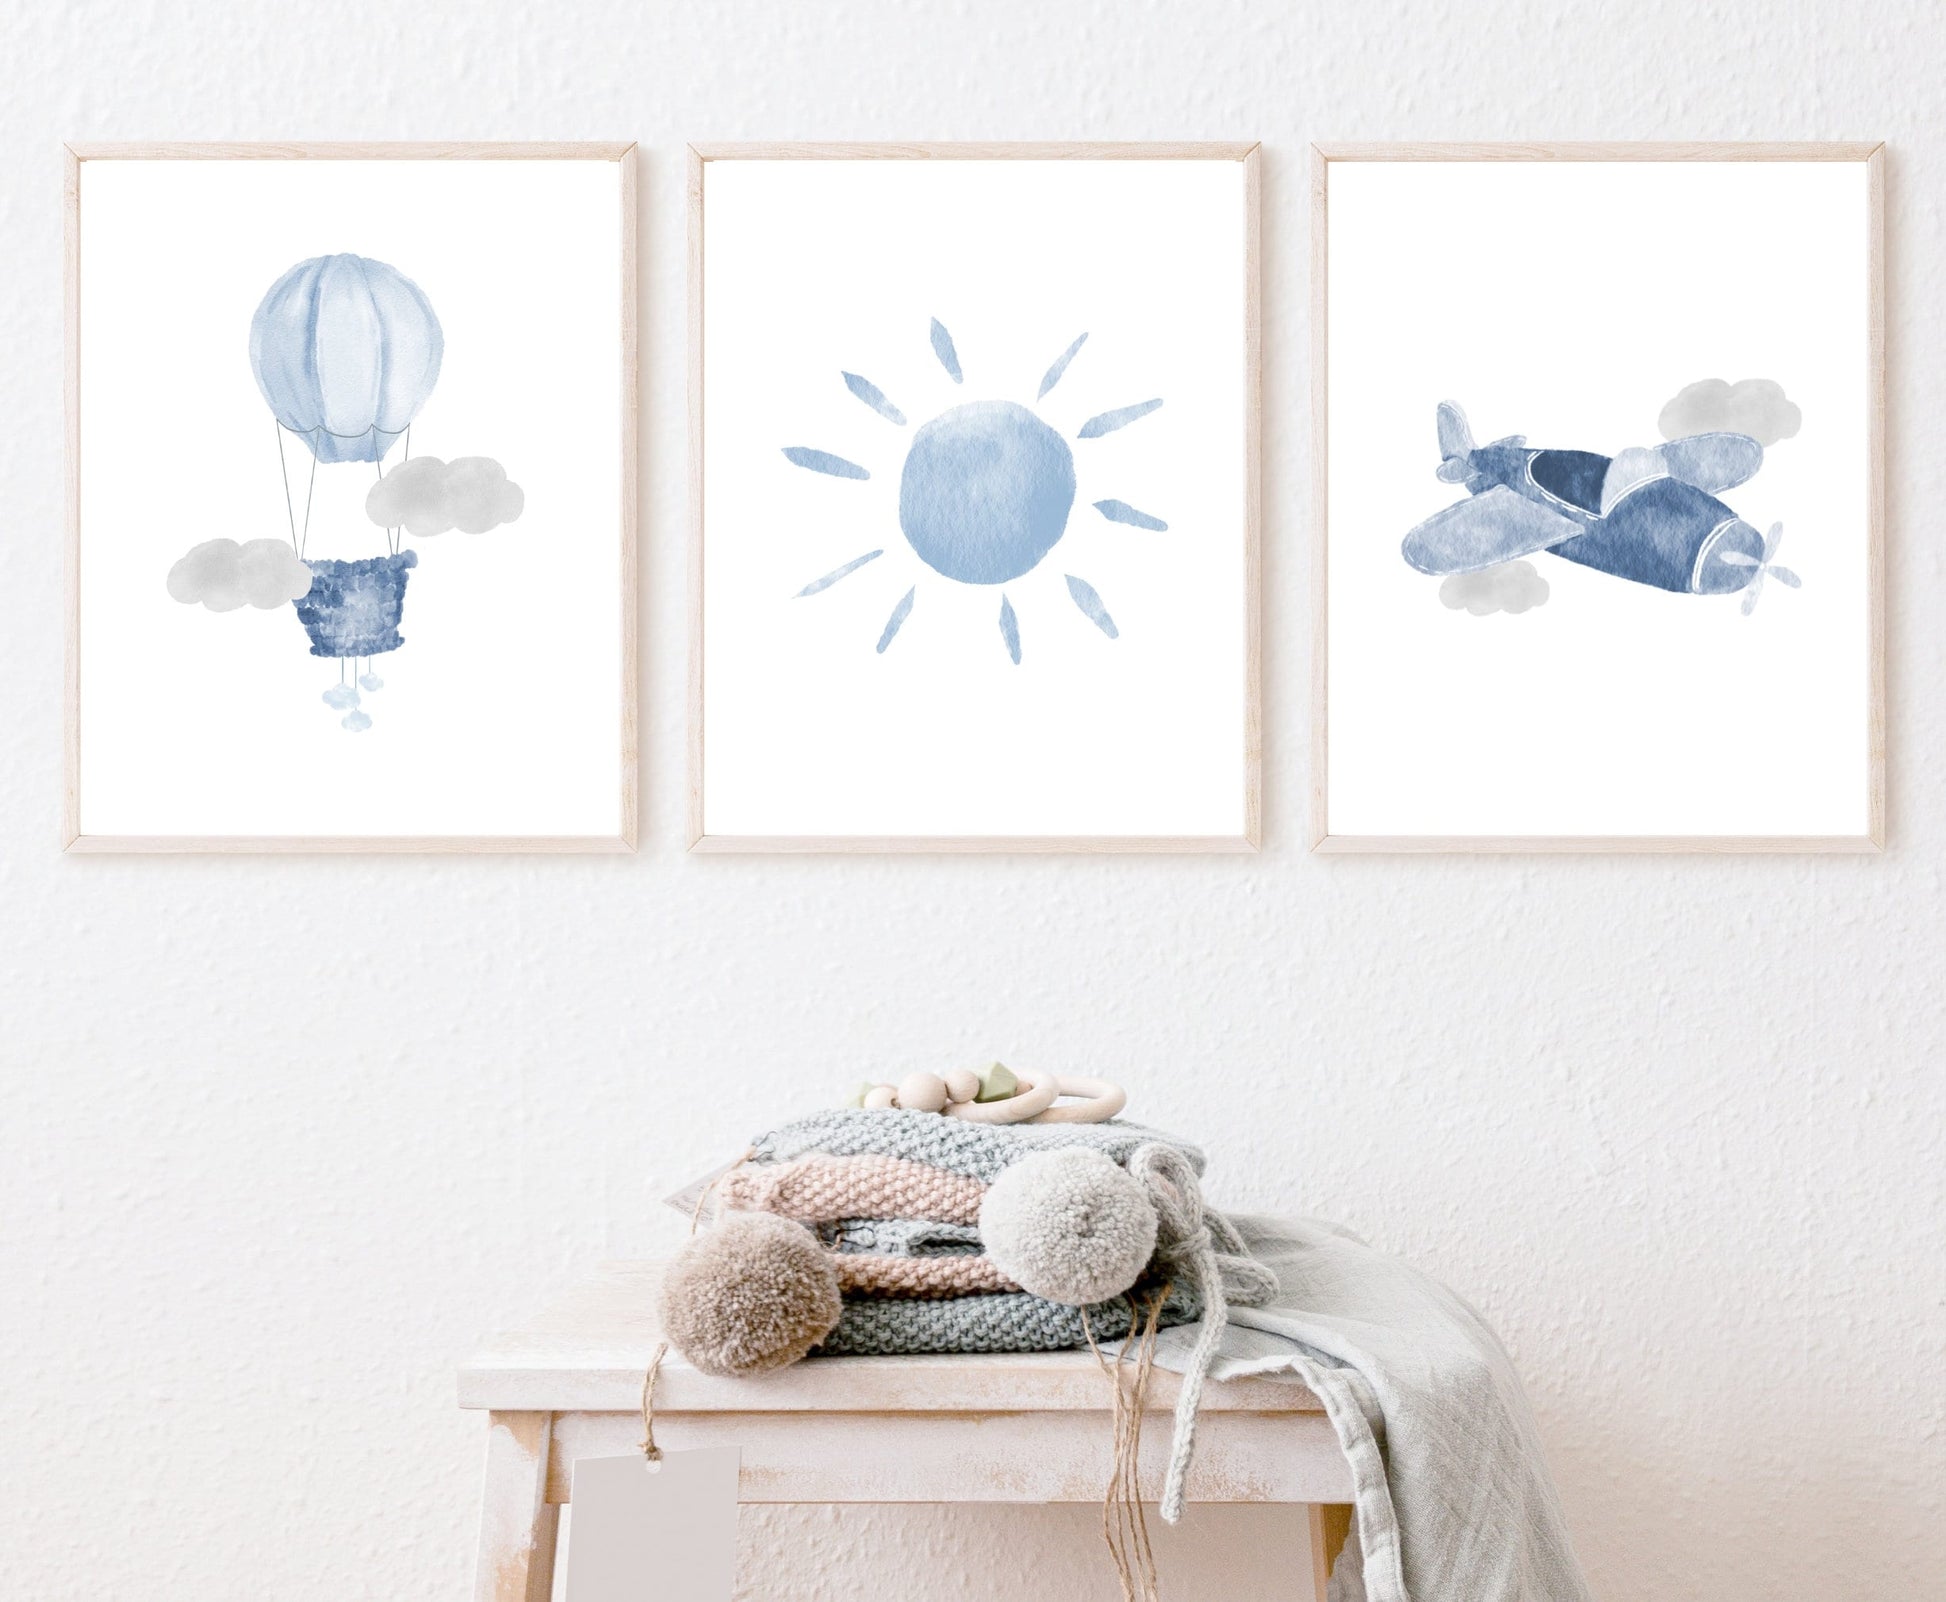 An image showing three digital prints that are hung on a wall. The first one shows a baby blue air balloon with two grey clouds design. The second one shows a baby blue sun. The third one shows a baby blue airplane and two gray clouds.